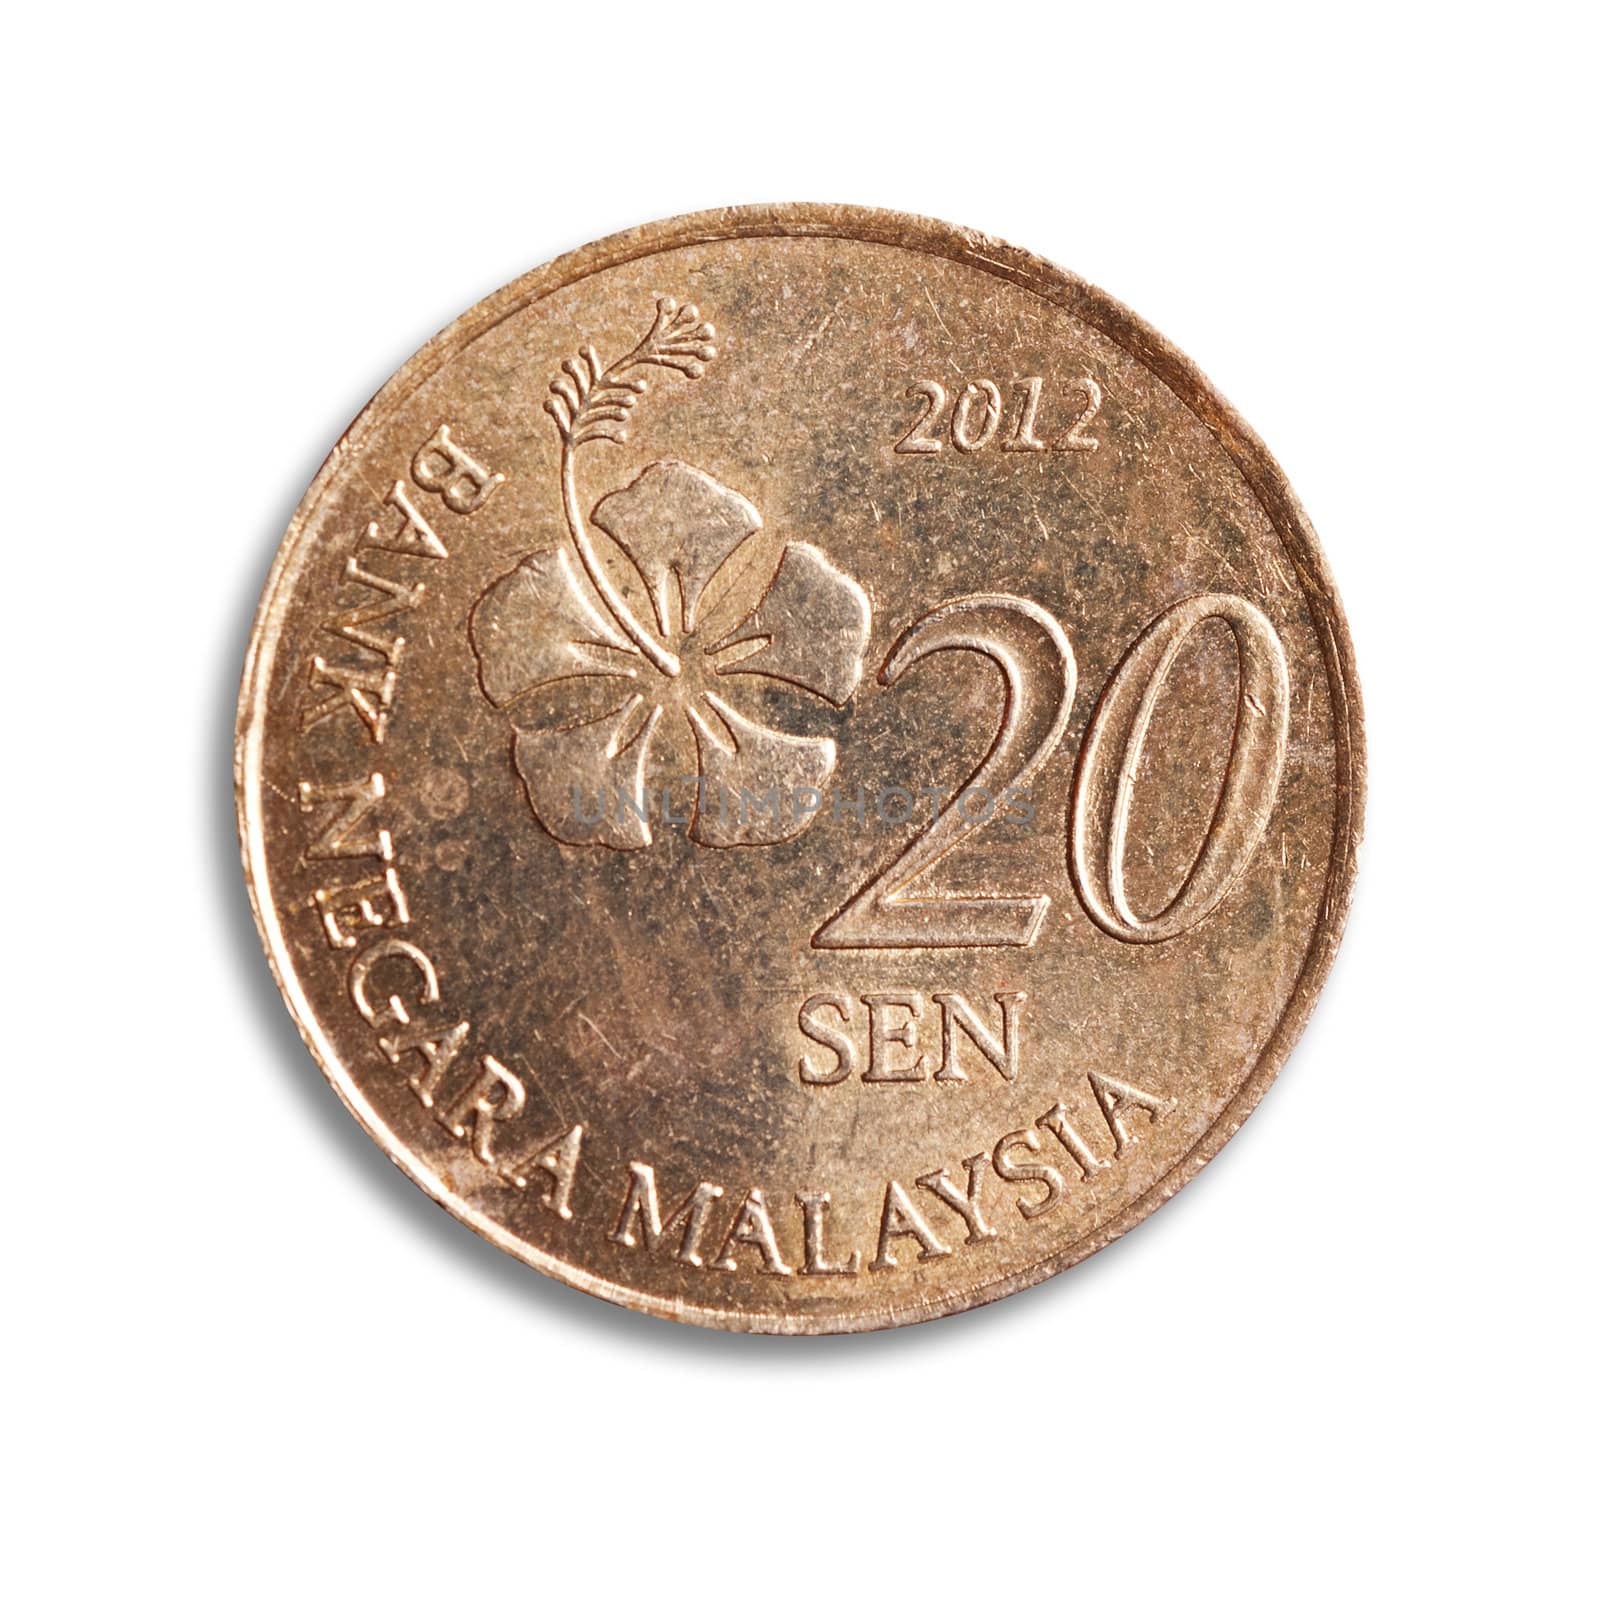 Malaysian coin, white backgroudn, clipping path.